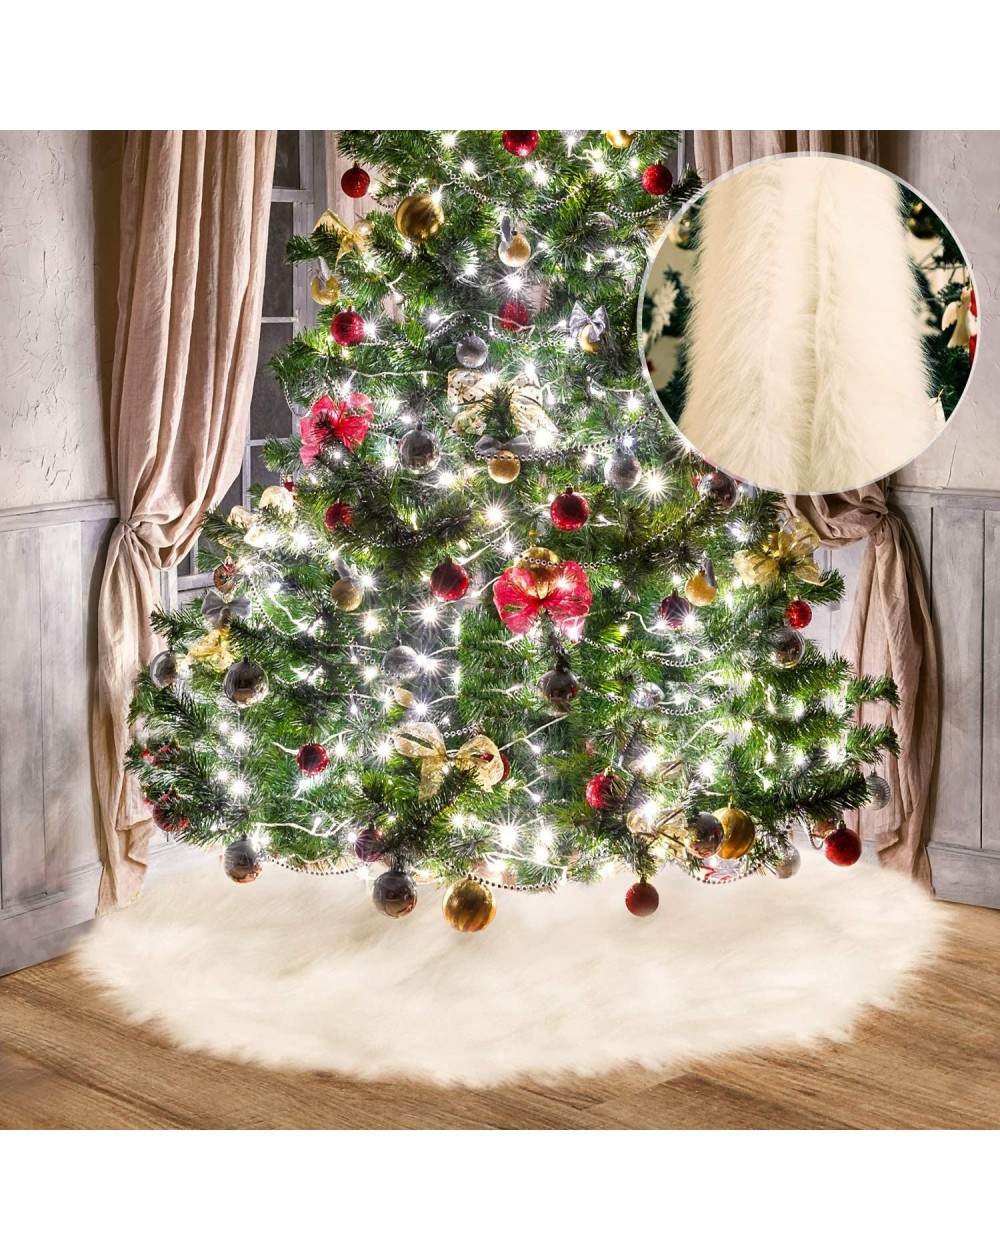 Tree Skirts White Faux Fur Christmas Tree Skirt Snow Tree Skirts for Christmas Holiday Decorations (80 cm) - C218KQY09M9 $21.06